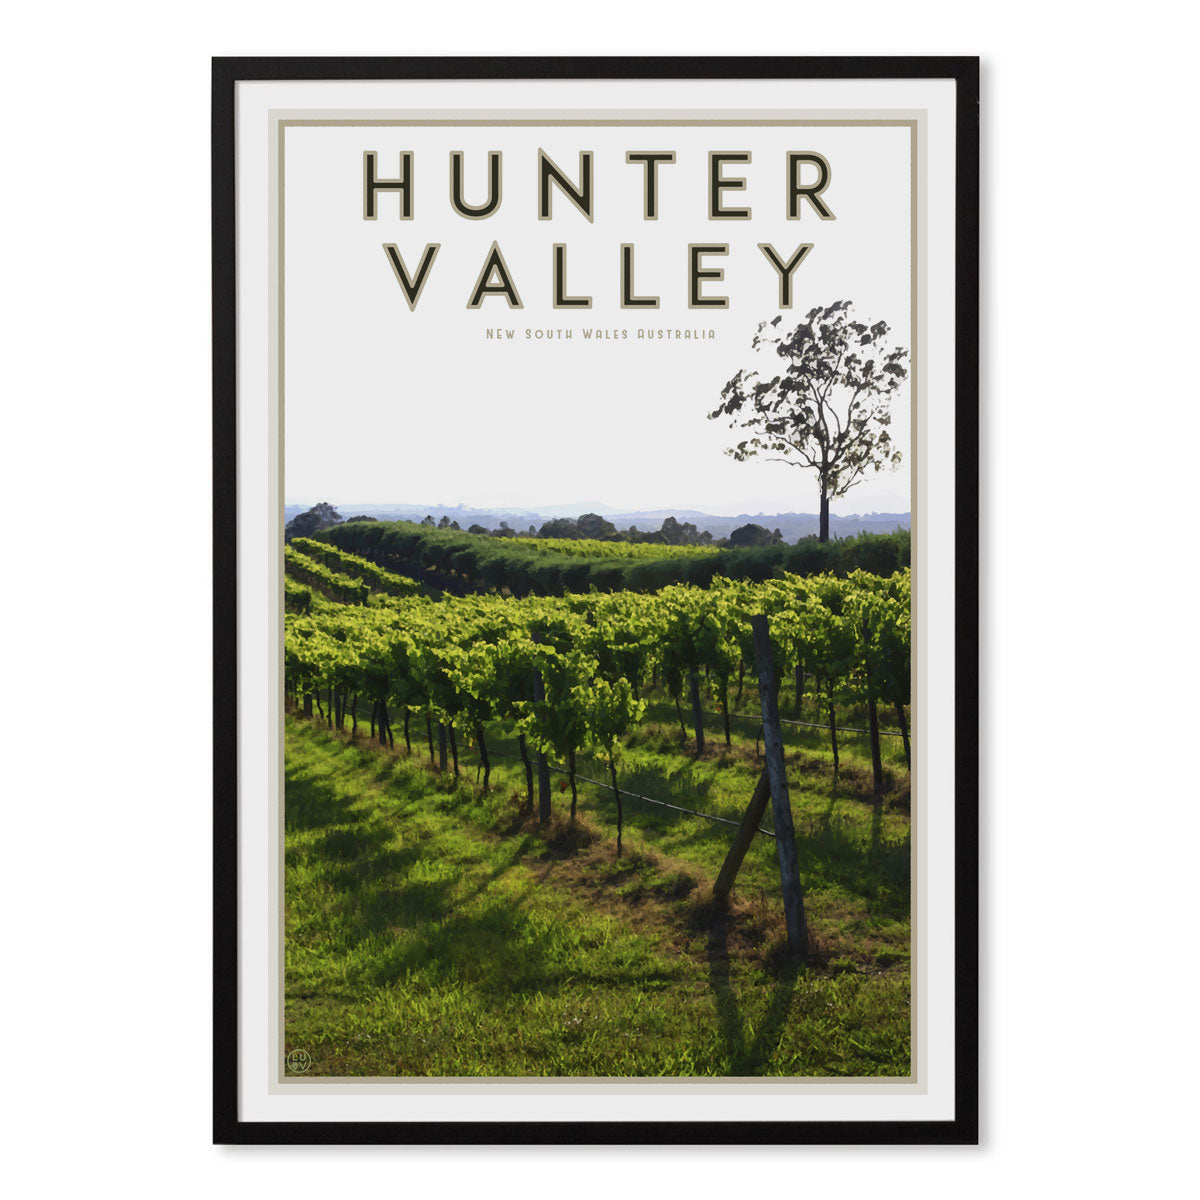 Hunter Valley travel poster in black frame - by places we luv